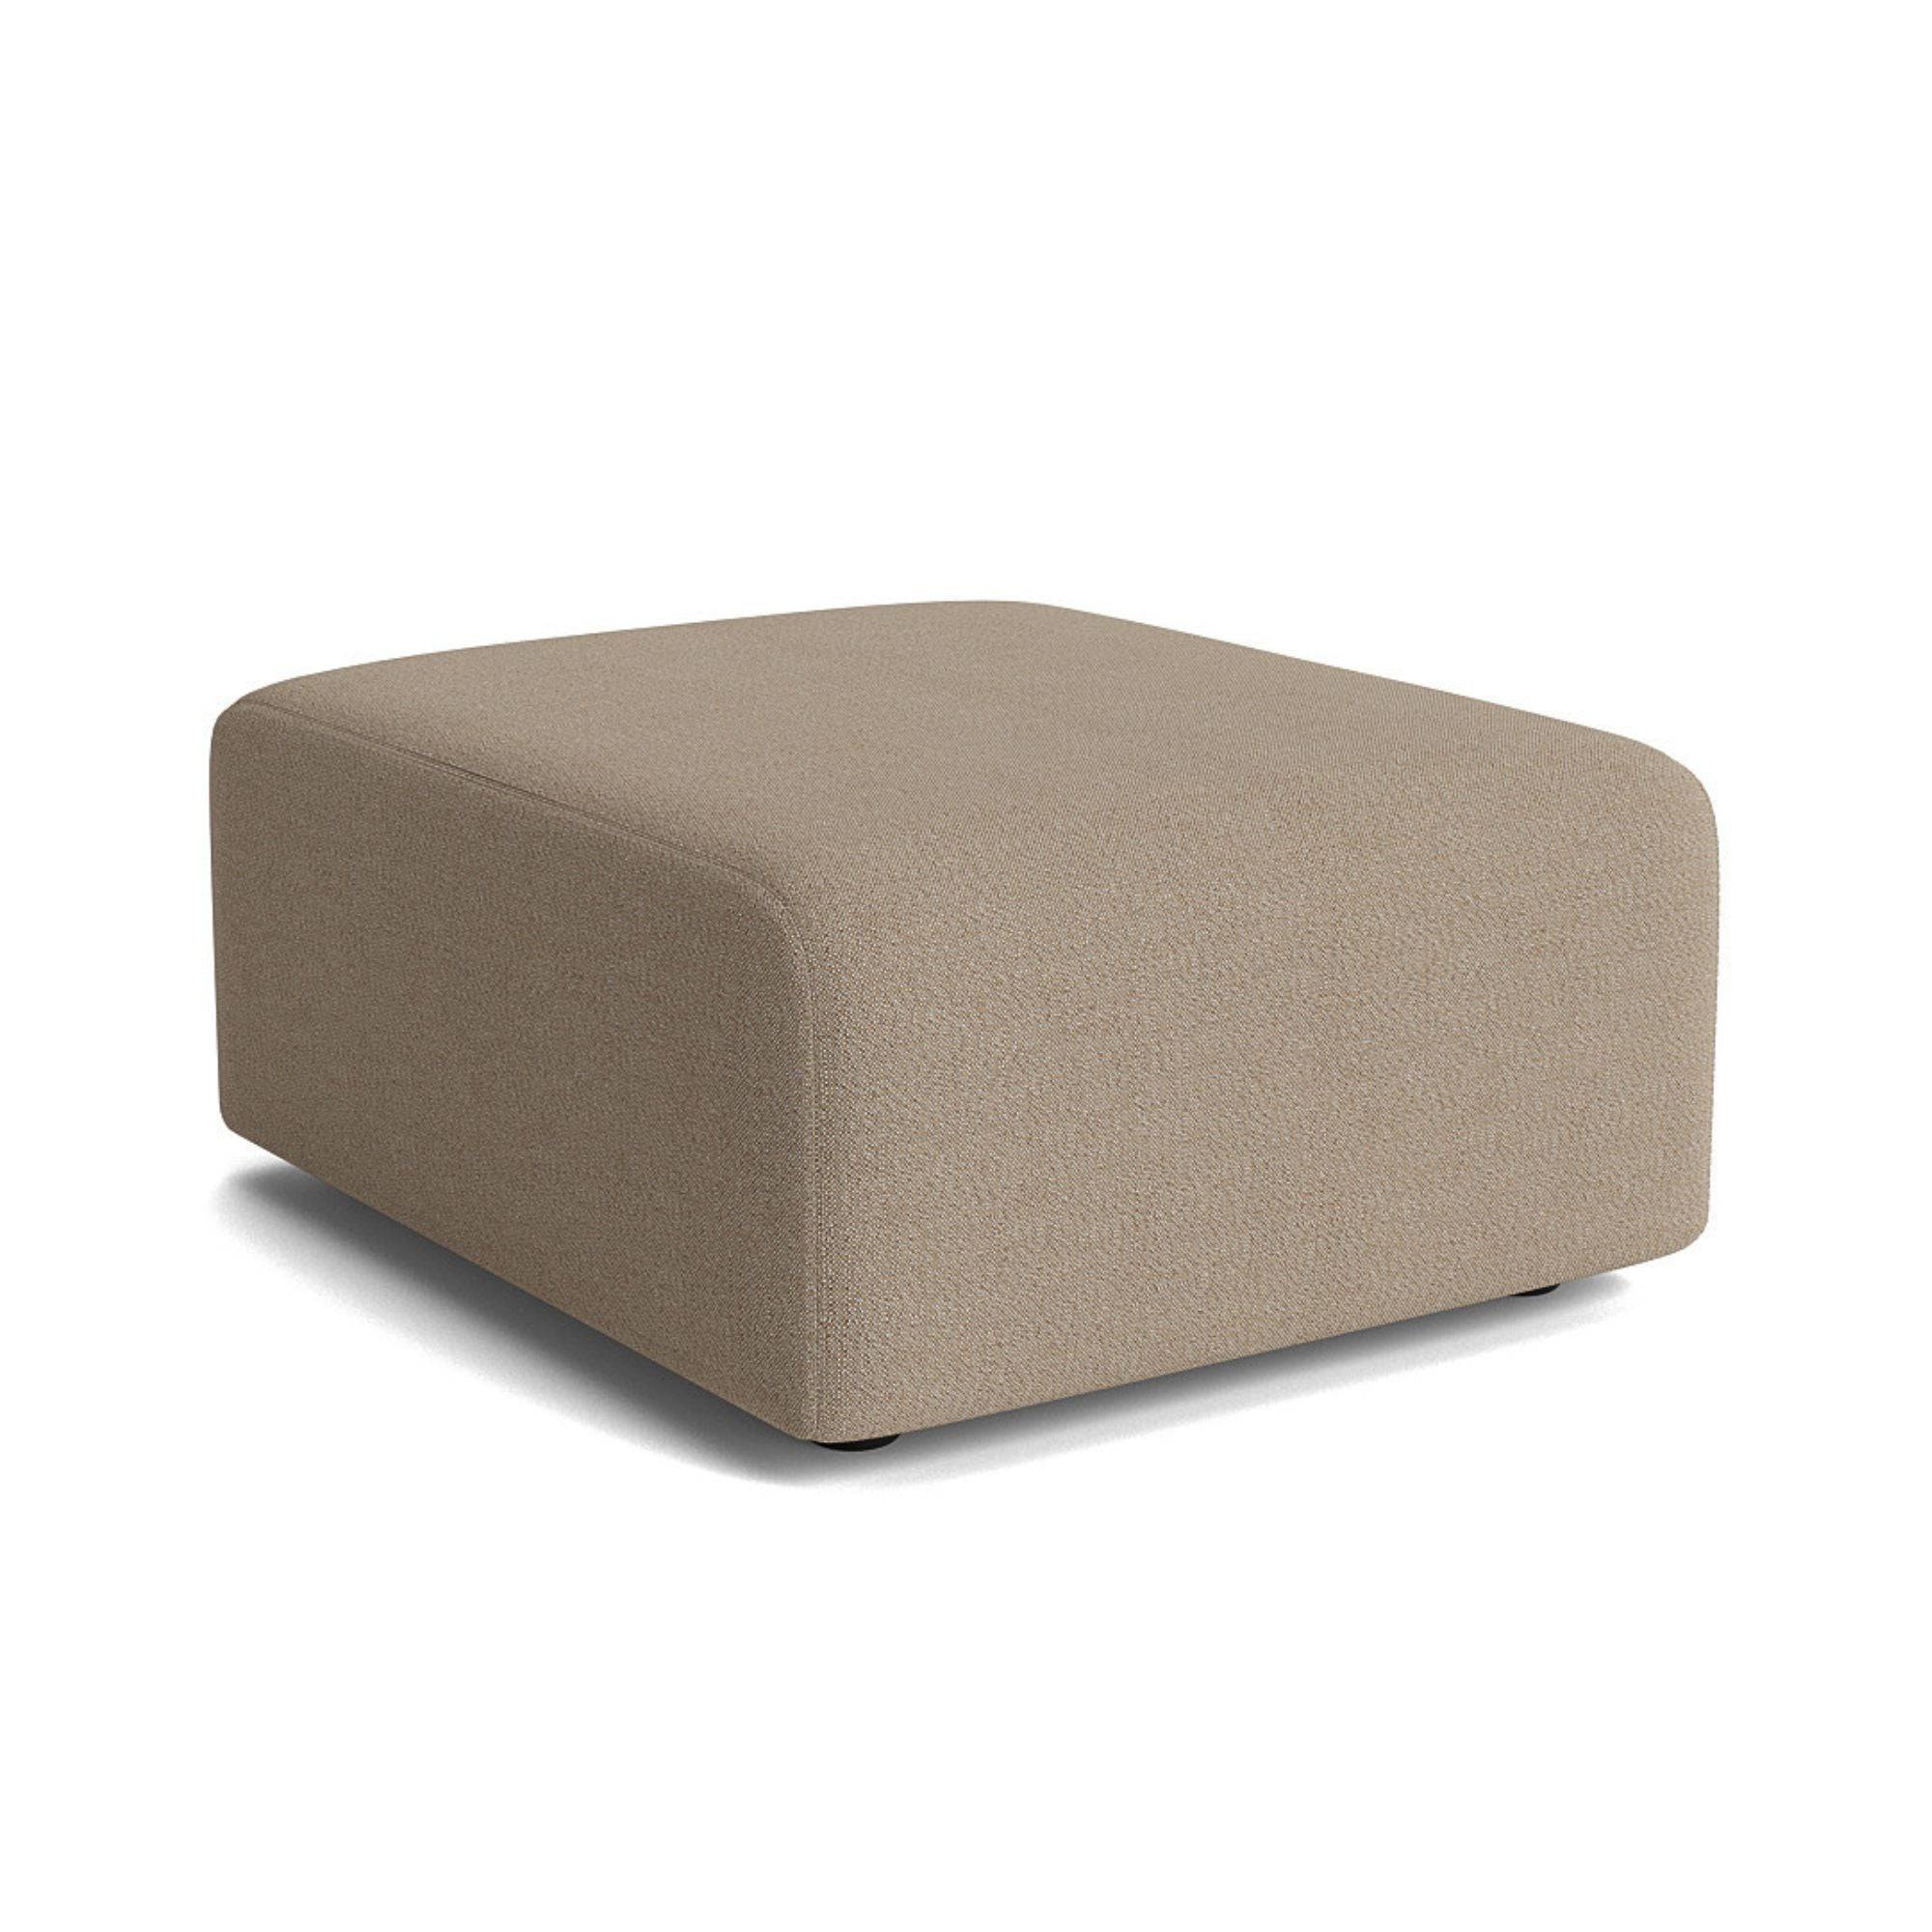 Outdoor Studio Ottoman Classic - THAT COOL LIVING